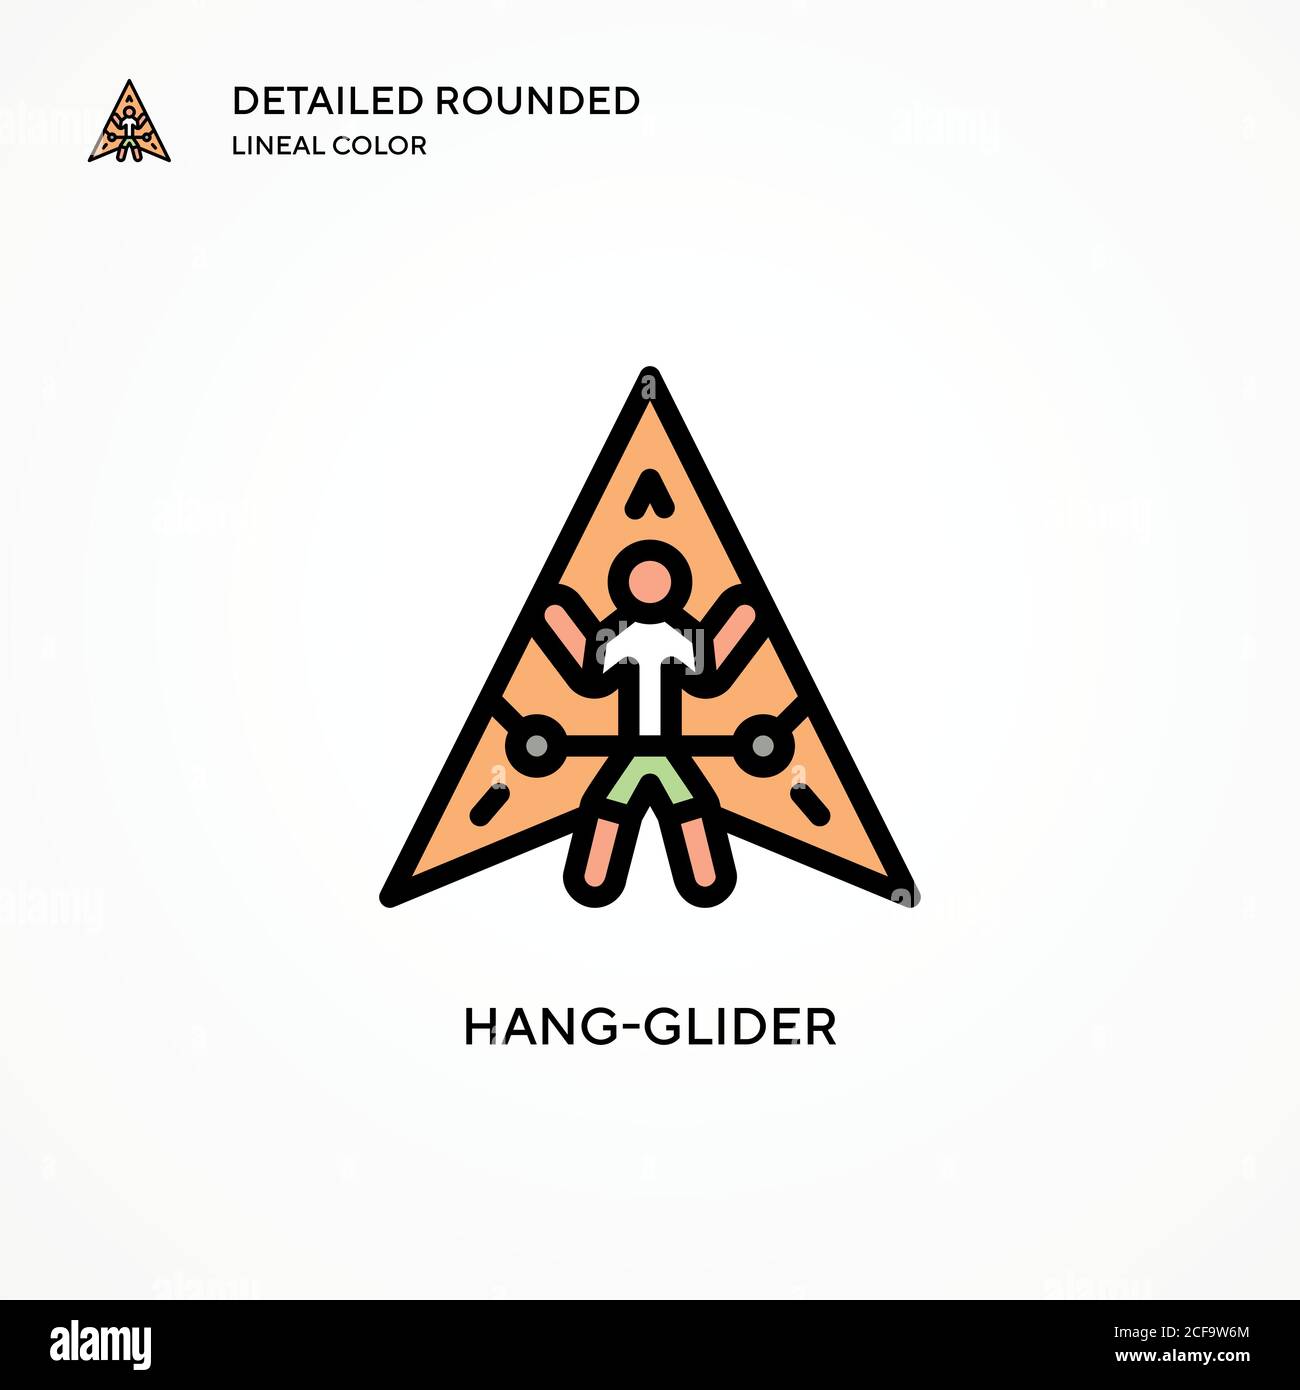 Hang-glider vector icon. Modern vector illustration concepts. Easy to edit and customize. Stock Vector